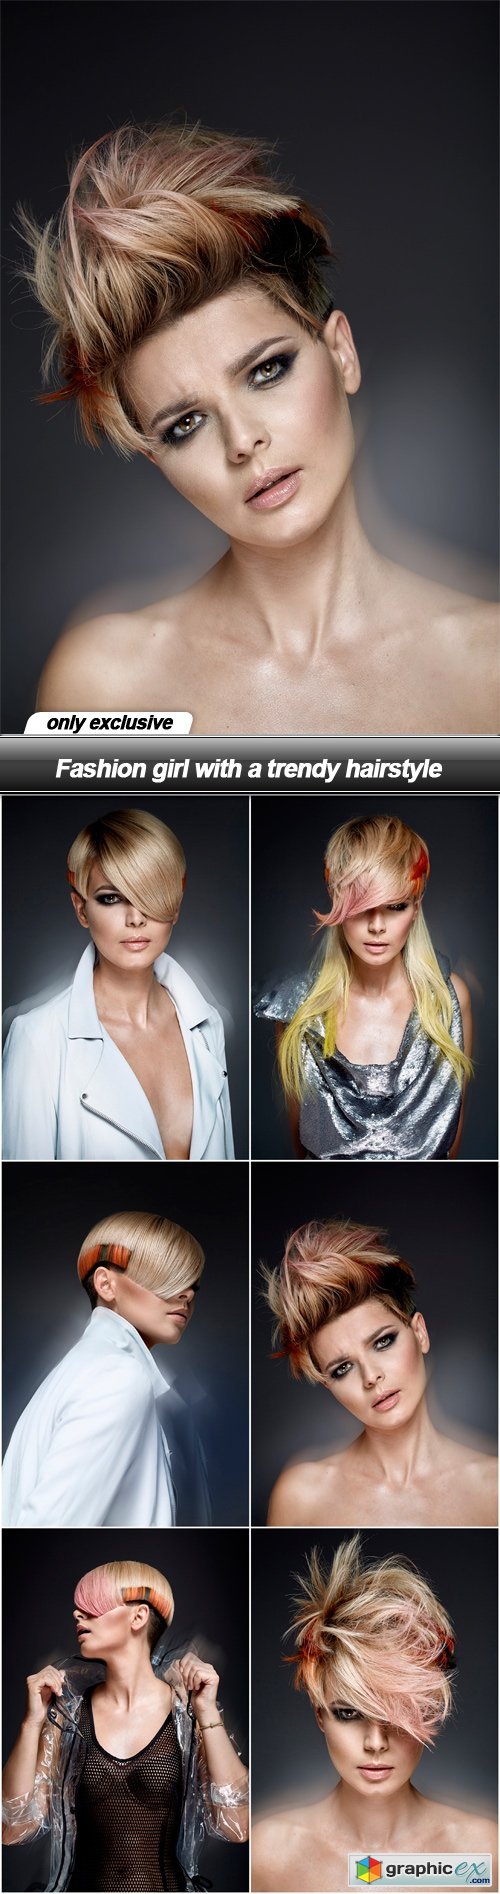 Fashion girl with a trendy hairstyle - 6 UHQ JPEG